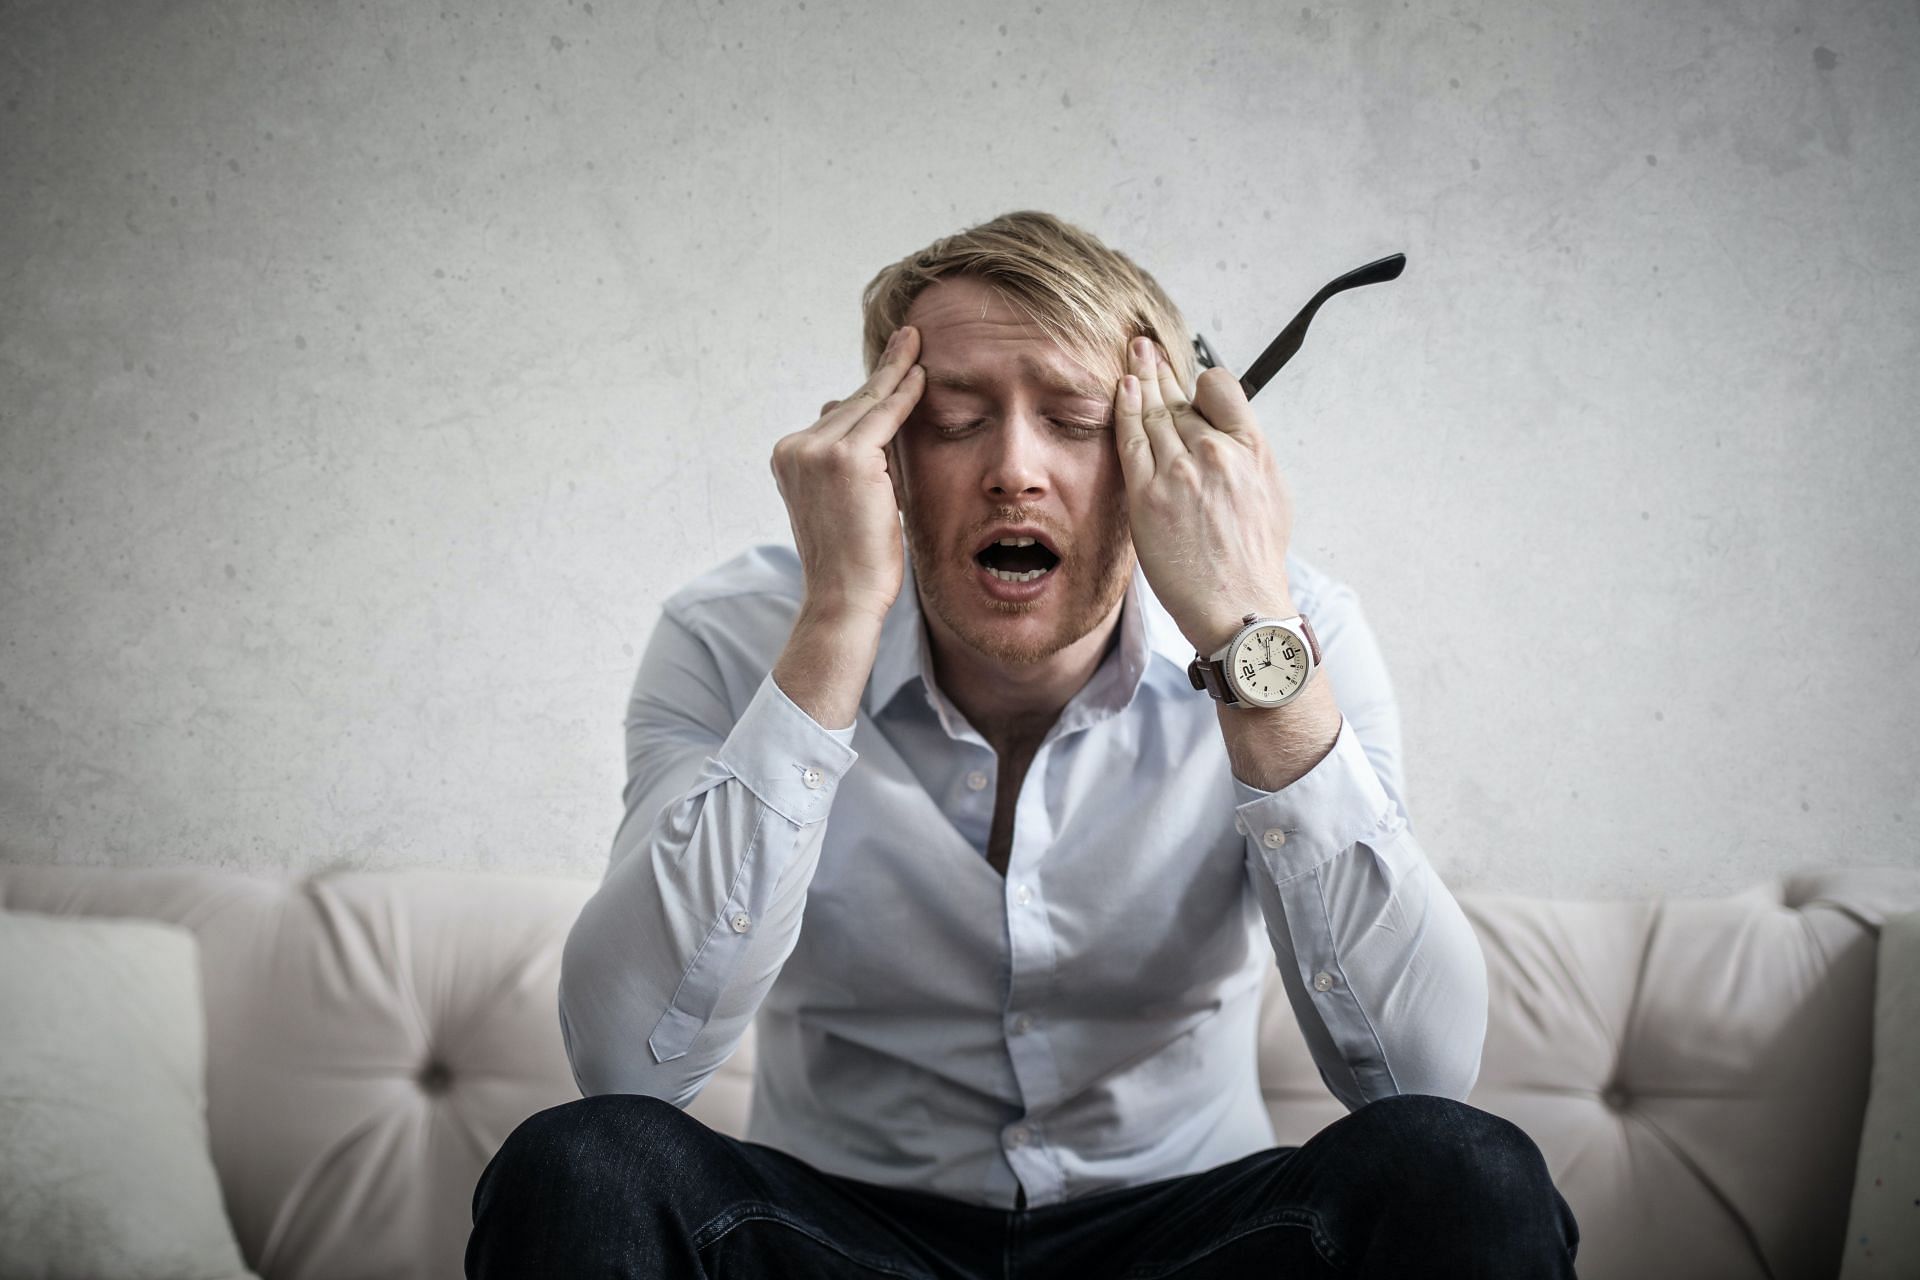 High blood pressure or low blood pressure can cause headaches.(Image via Pexels/Andrea Piacquadio)